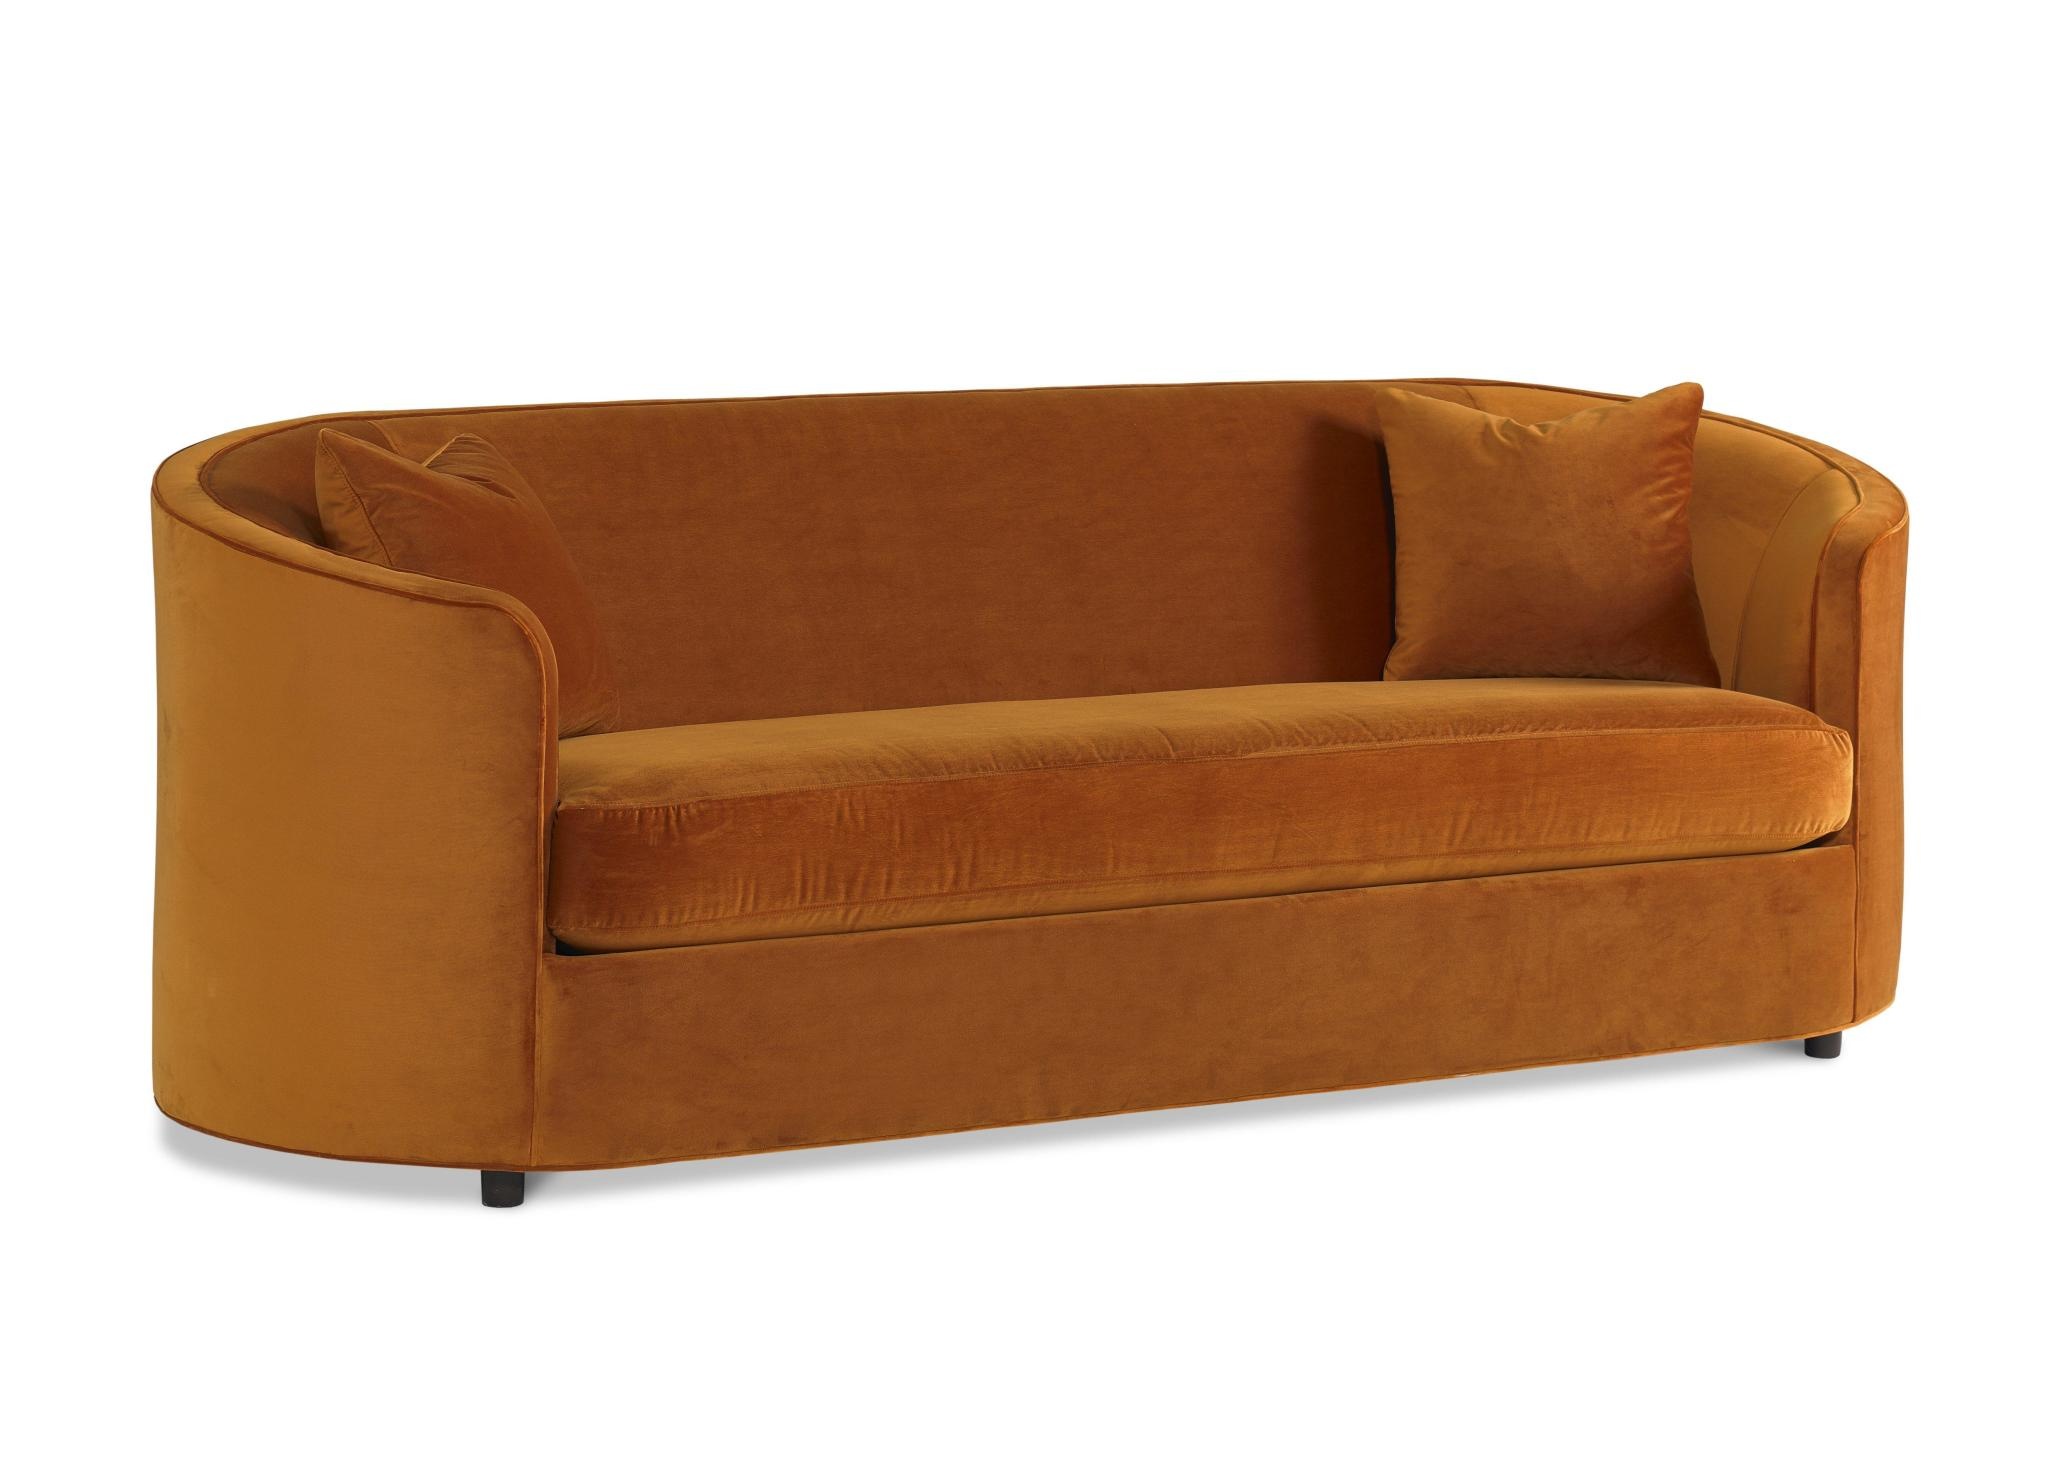 Precedent - Vera Sofa, 92 x 36.5 Customizable, Furniture Available for Local Delivery or Pick Up